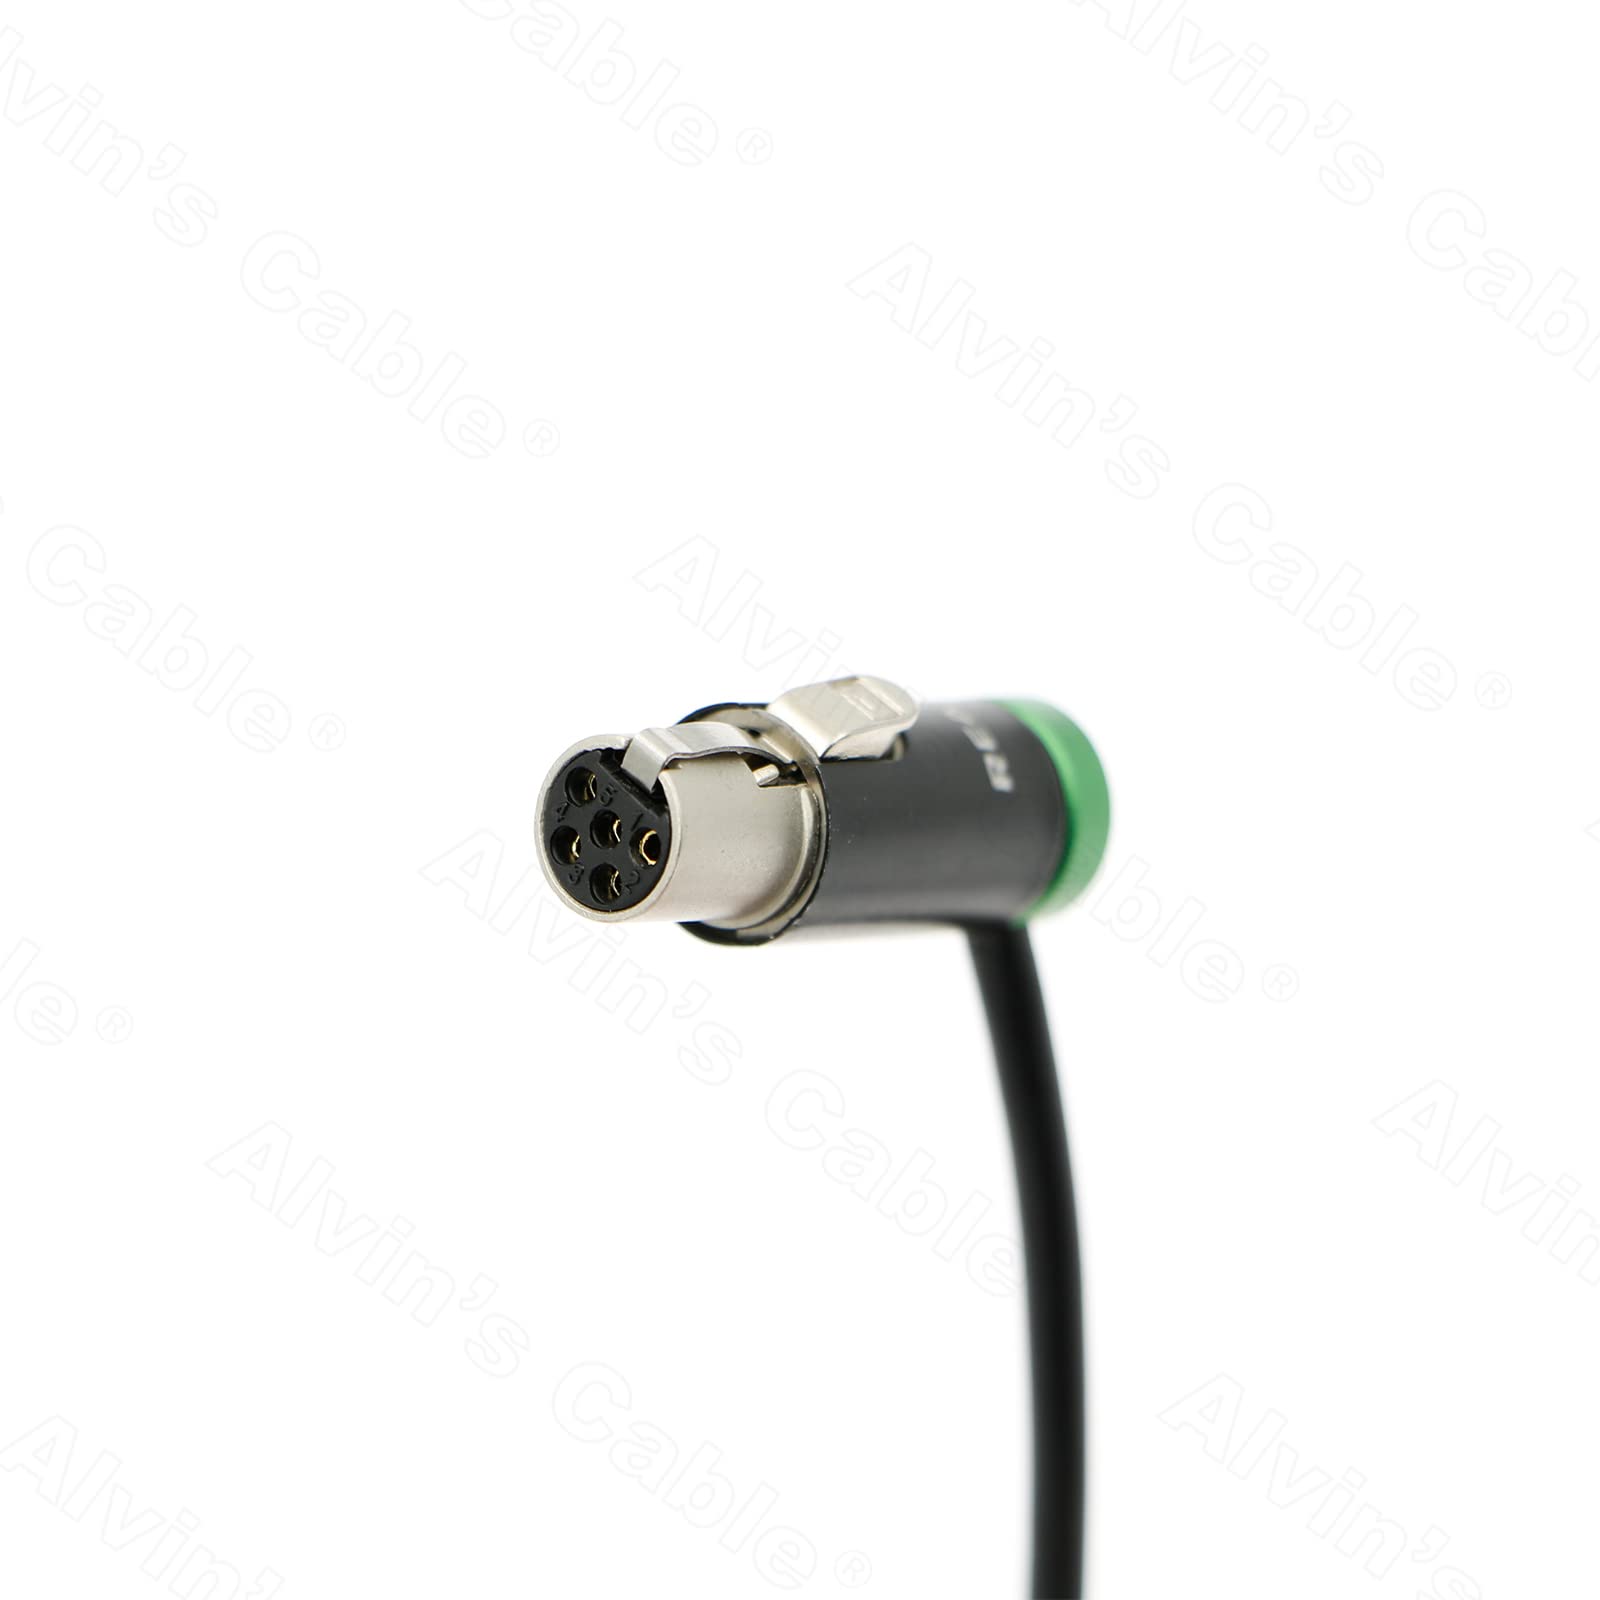 Alvin’s Cables Low-Profile TA5F to Dual LP XLR 3 Pin Male Audio-Cable for Wisycom-MCR54| Lectrosonics-DCHR-Receiver LP Mini XLR 5 Pin Female to Two XLR Output Splitter Cable for Sound Devices